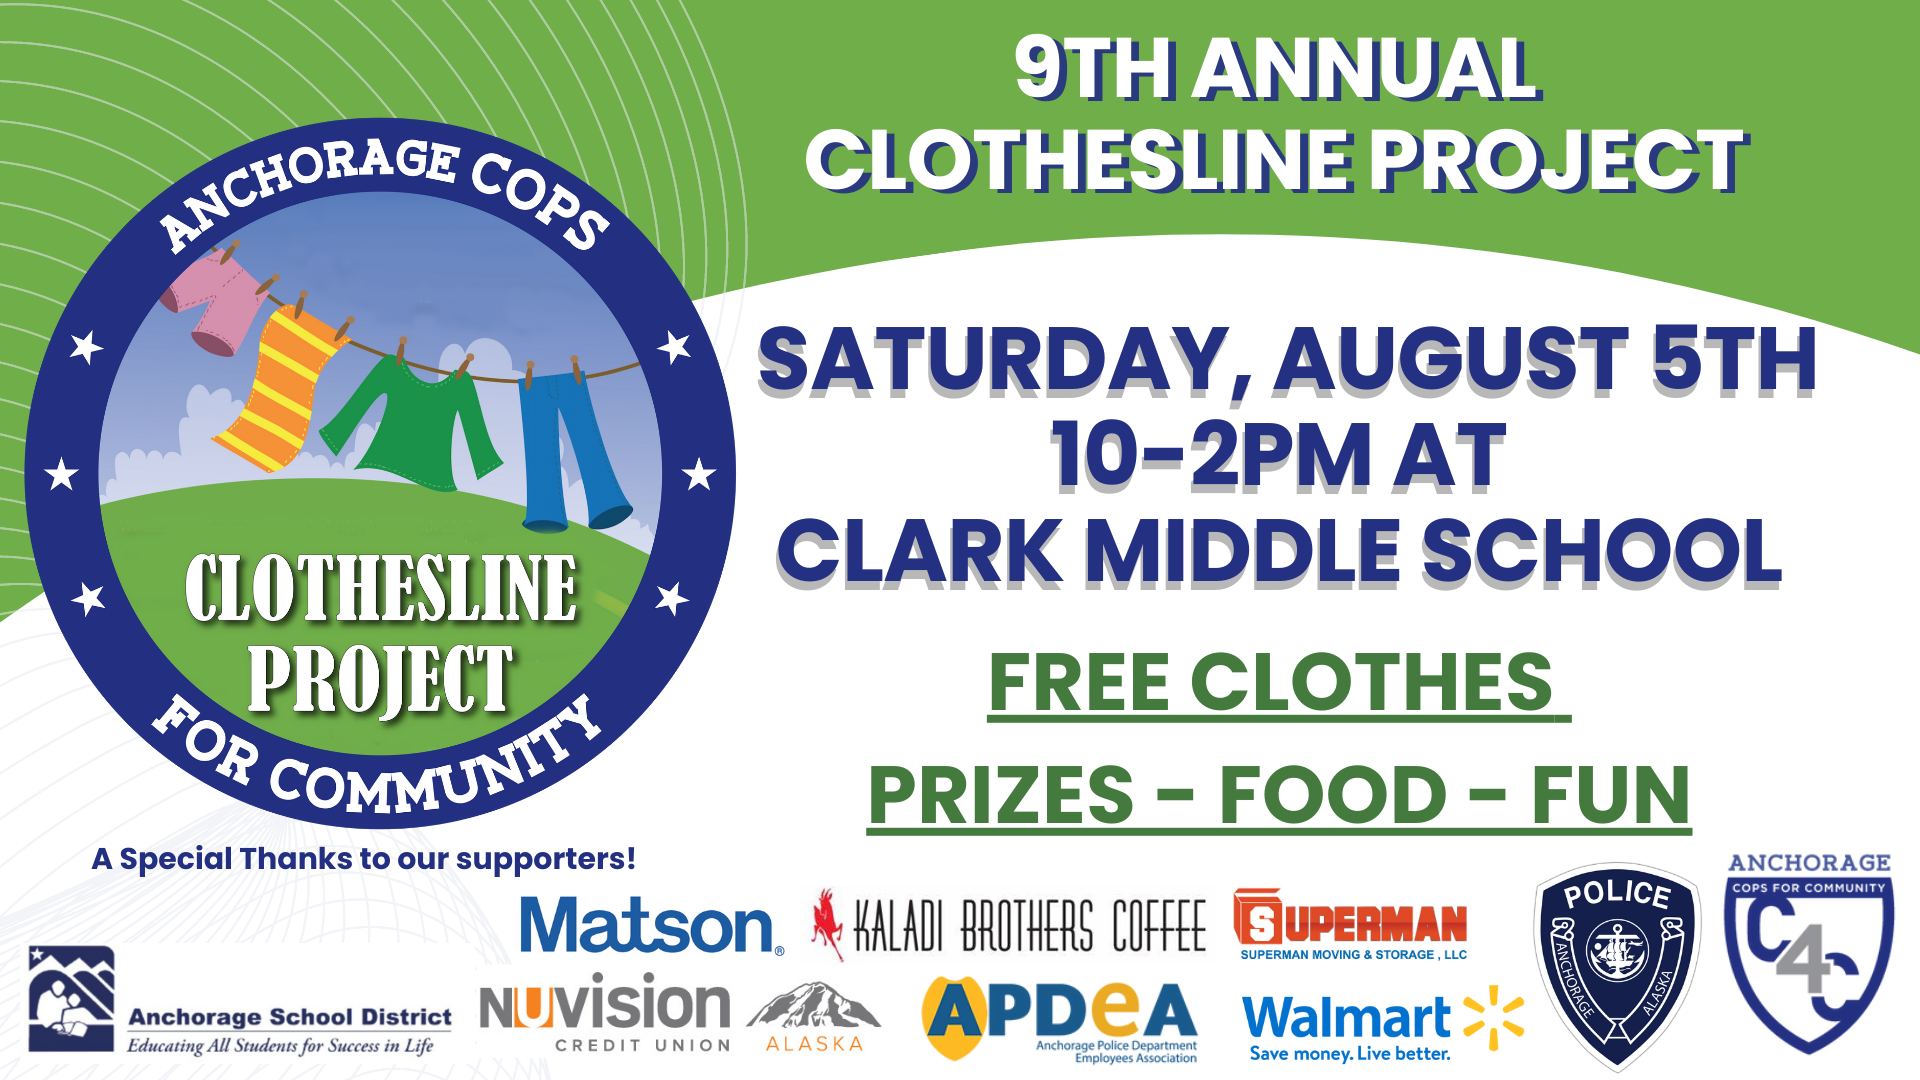 Graphic design with clothesline project and partner logos. Text: 9th Annual Clothesline Project. Saturday, August 5th. 10-2pm at Clark Middle School. Free clothes. Prizes. Food. Fun.